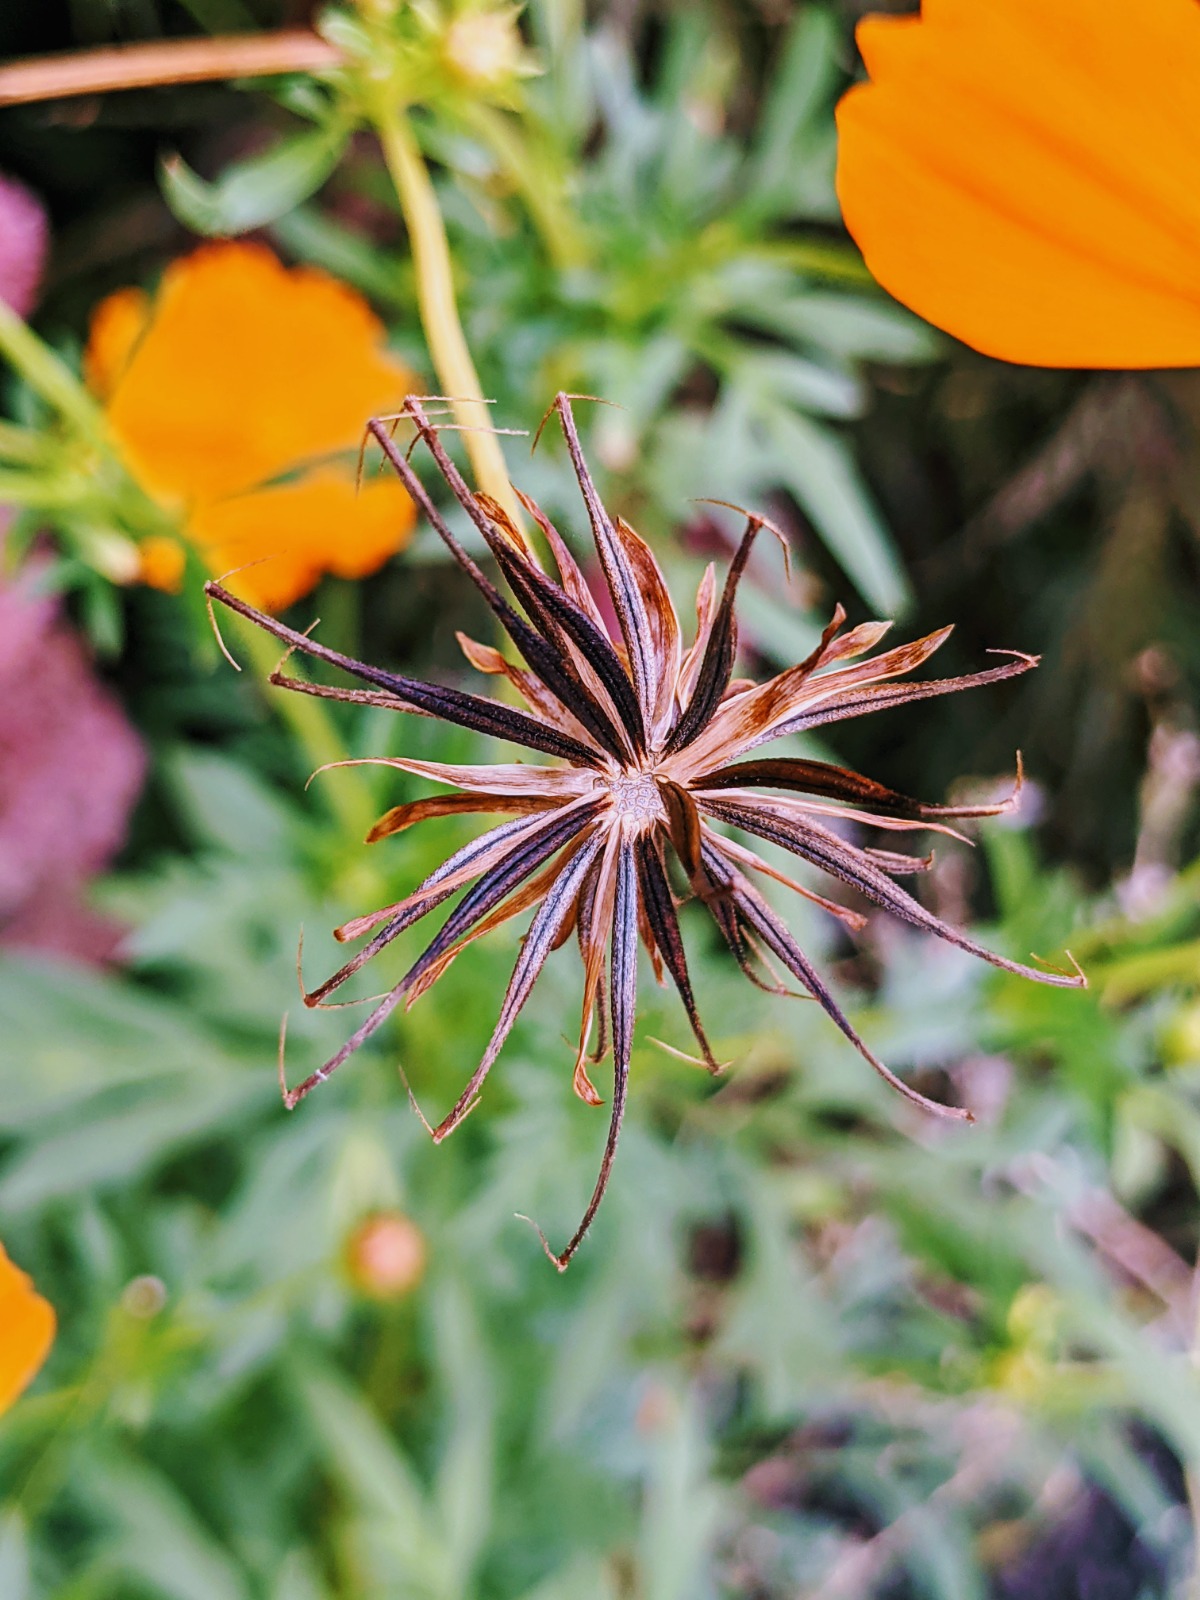 Orange Cosmos Flower Seeds create a burst style seed pod that resembles a firework